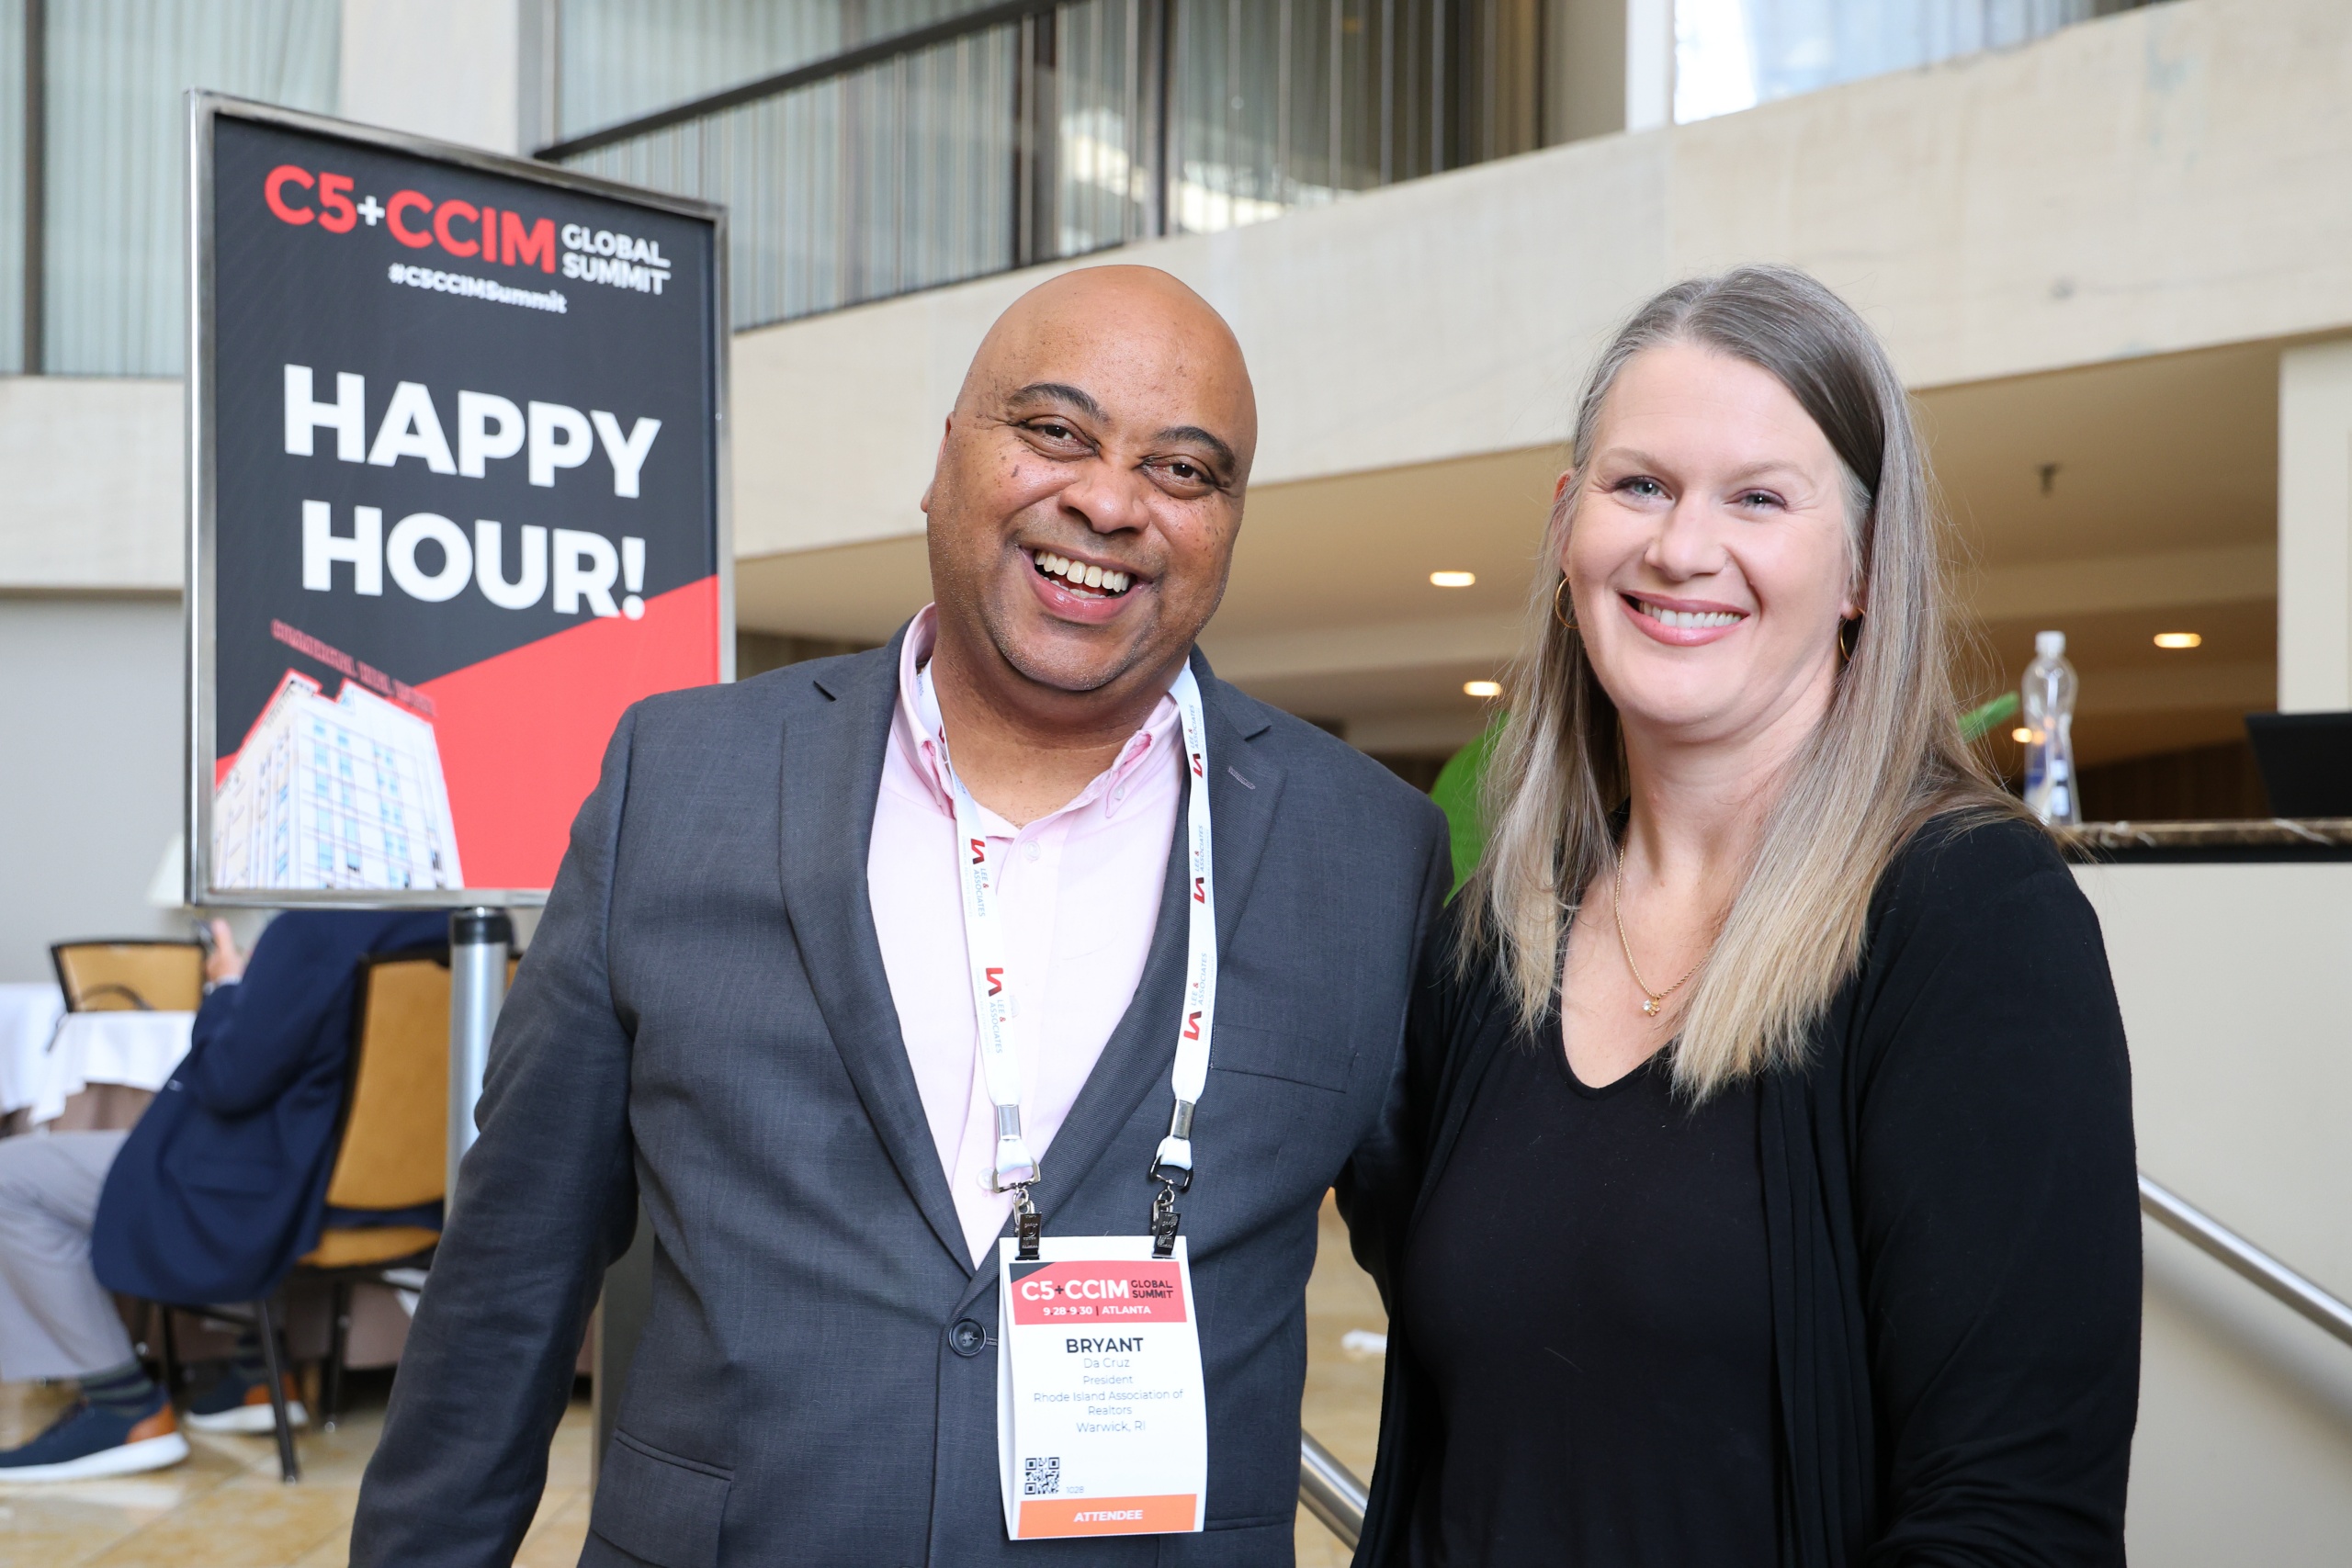 Happy attendees of the 2023 C5 + CCIM Global Summit